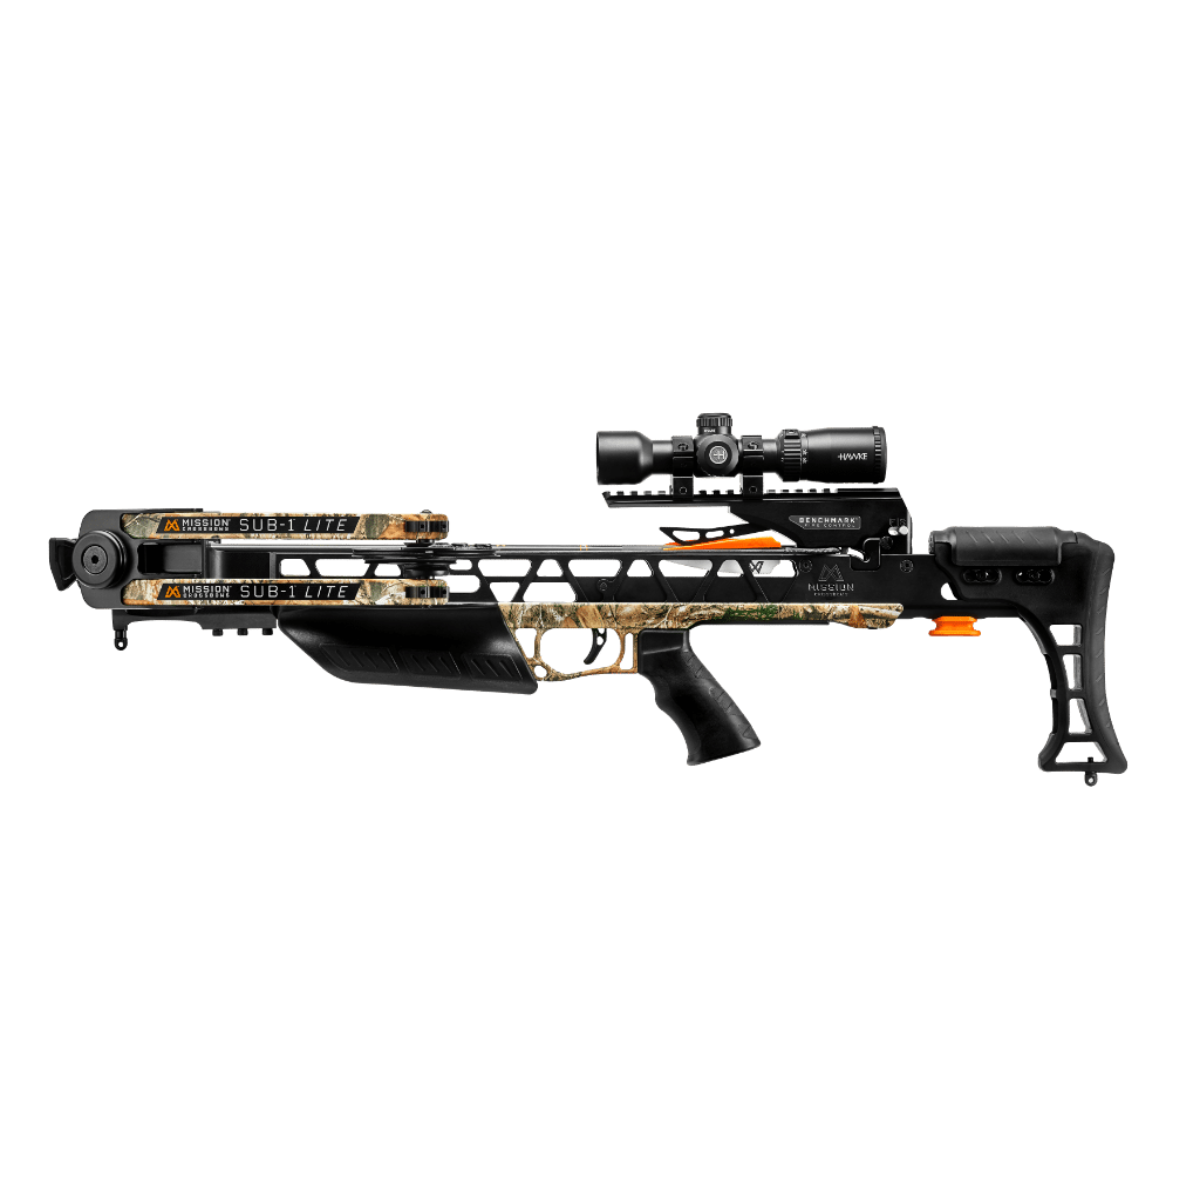 Mission SUB-1 Lite Crossbow Package